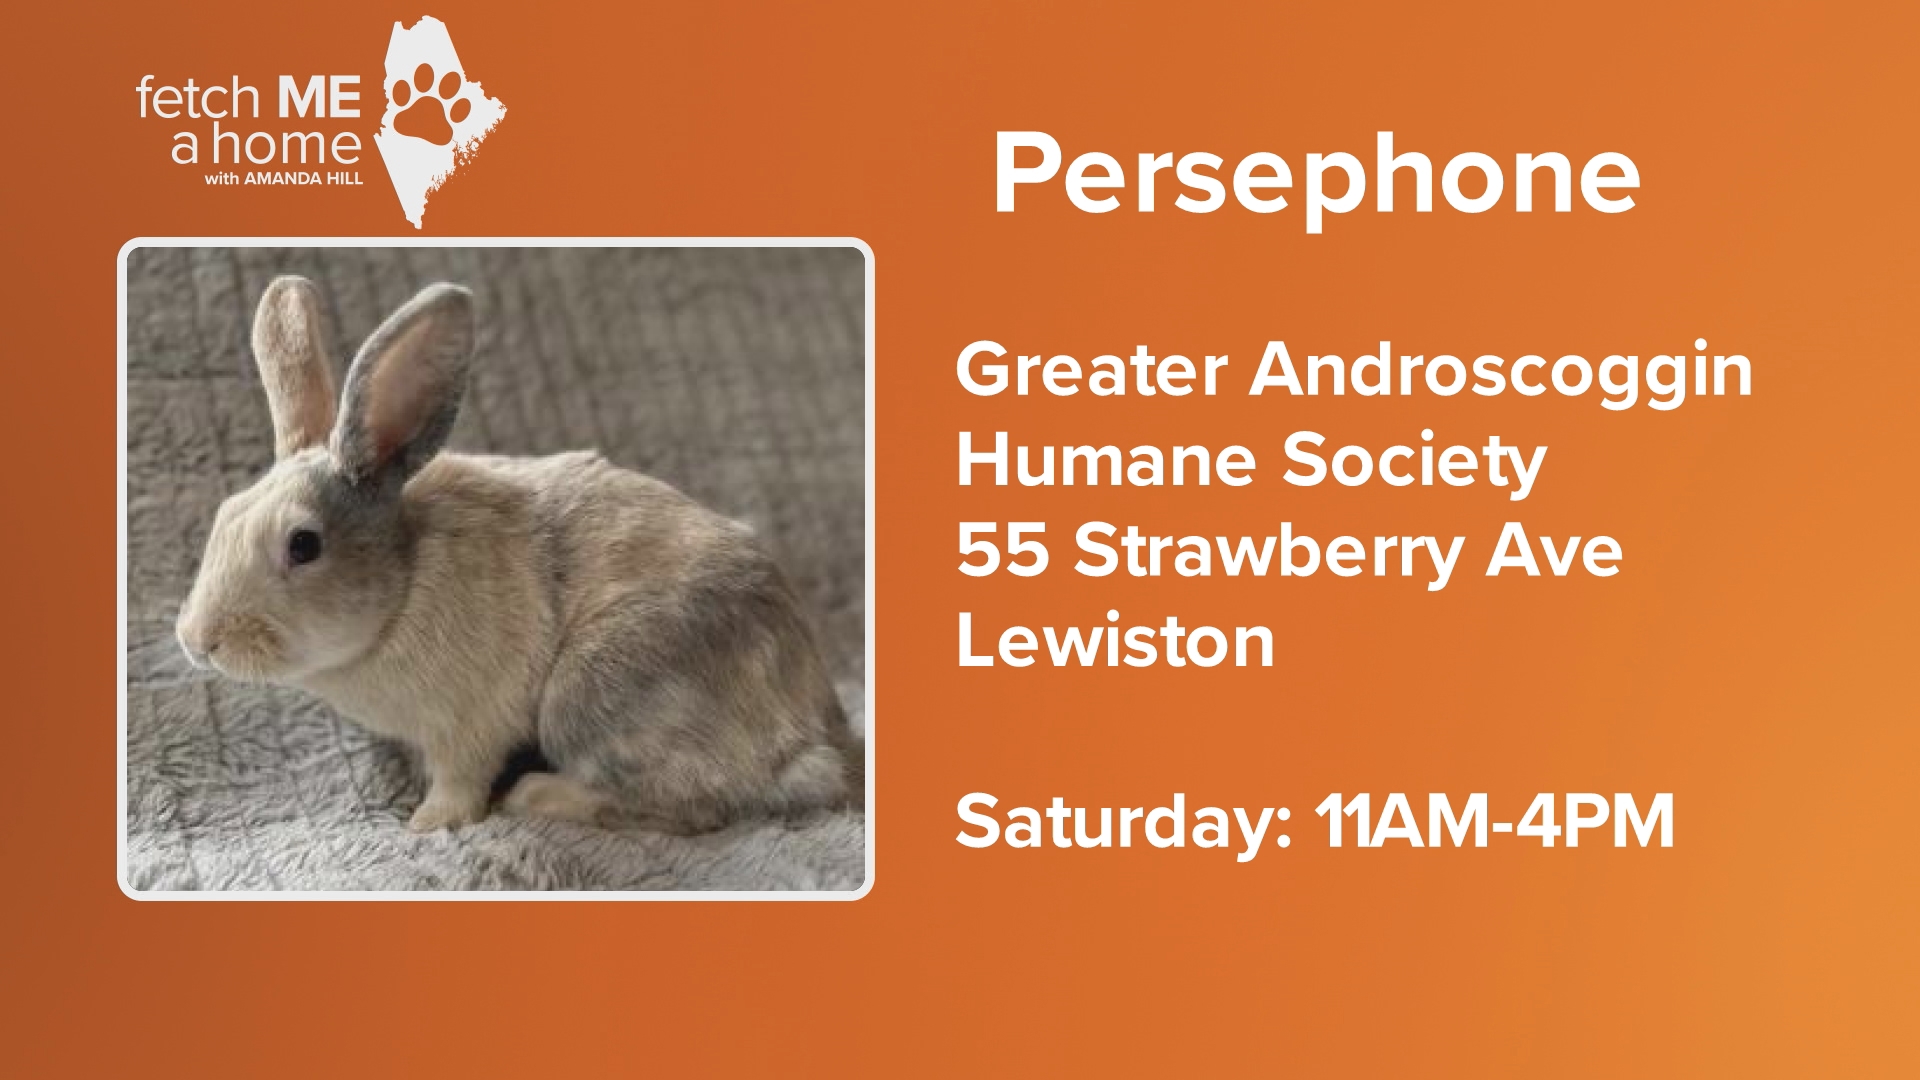 Persephone and her siblings are all looking for forever homes. You'll find them at the Greater Androscoggin Humane Society in Lewiston.